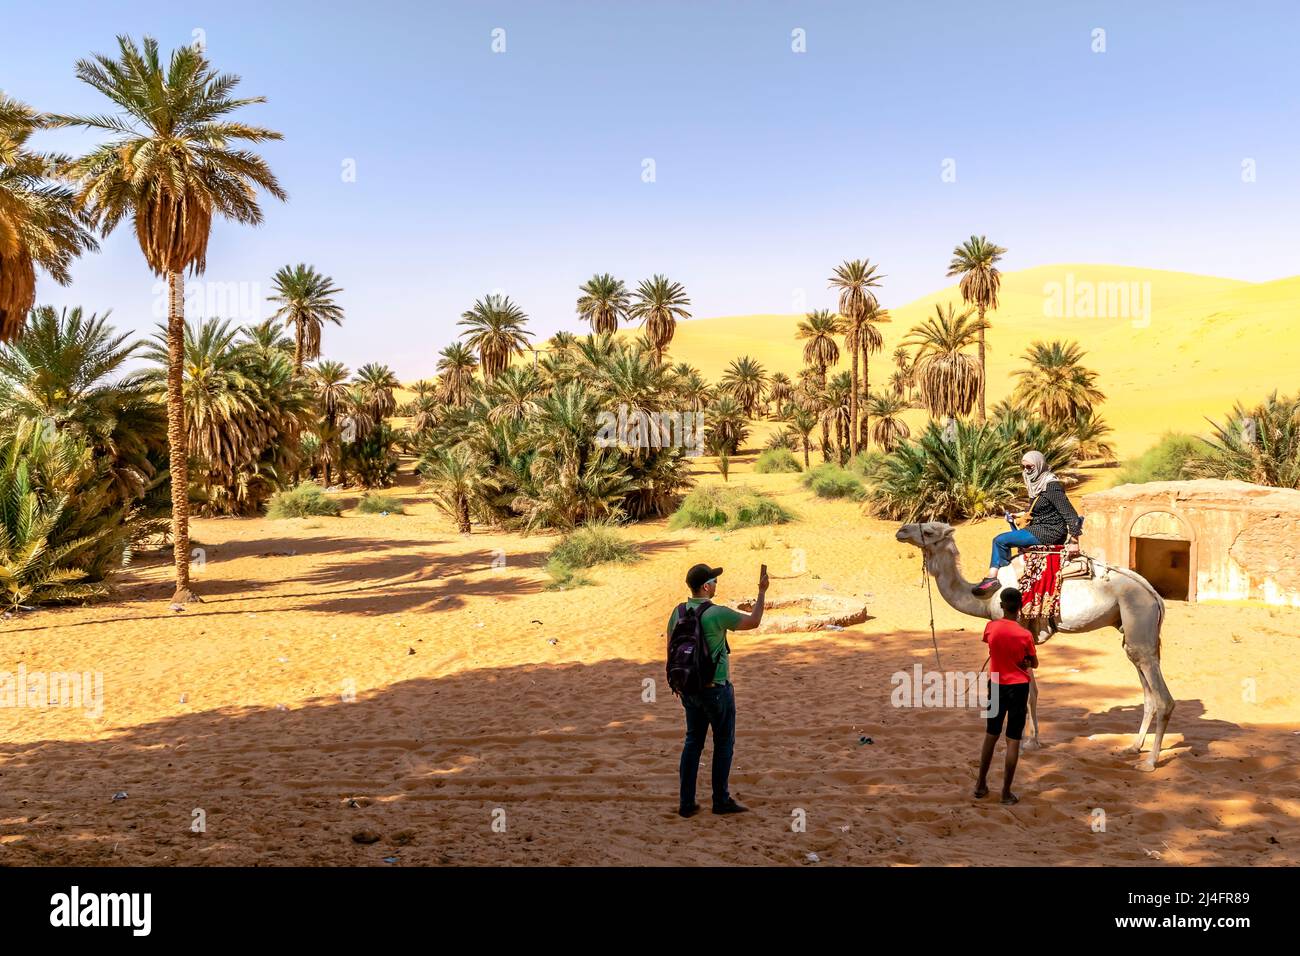 Tourists on the Sahara Desert, a women with headscarf on a dromedary camel and a man photographing with smartphone. Tuareg child local guide holding. Stock Photo